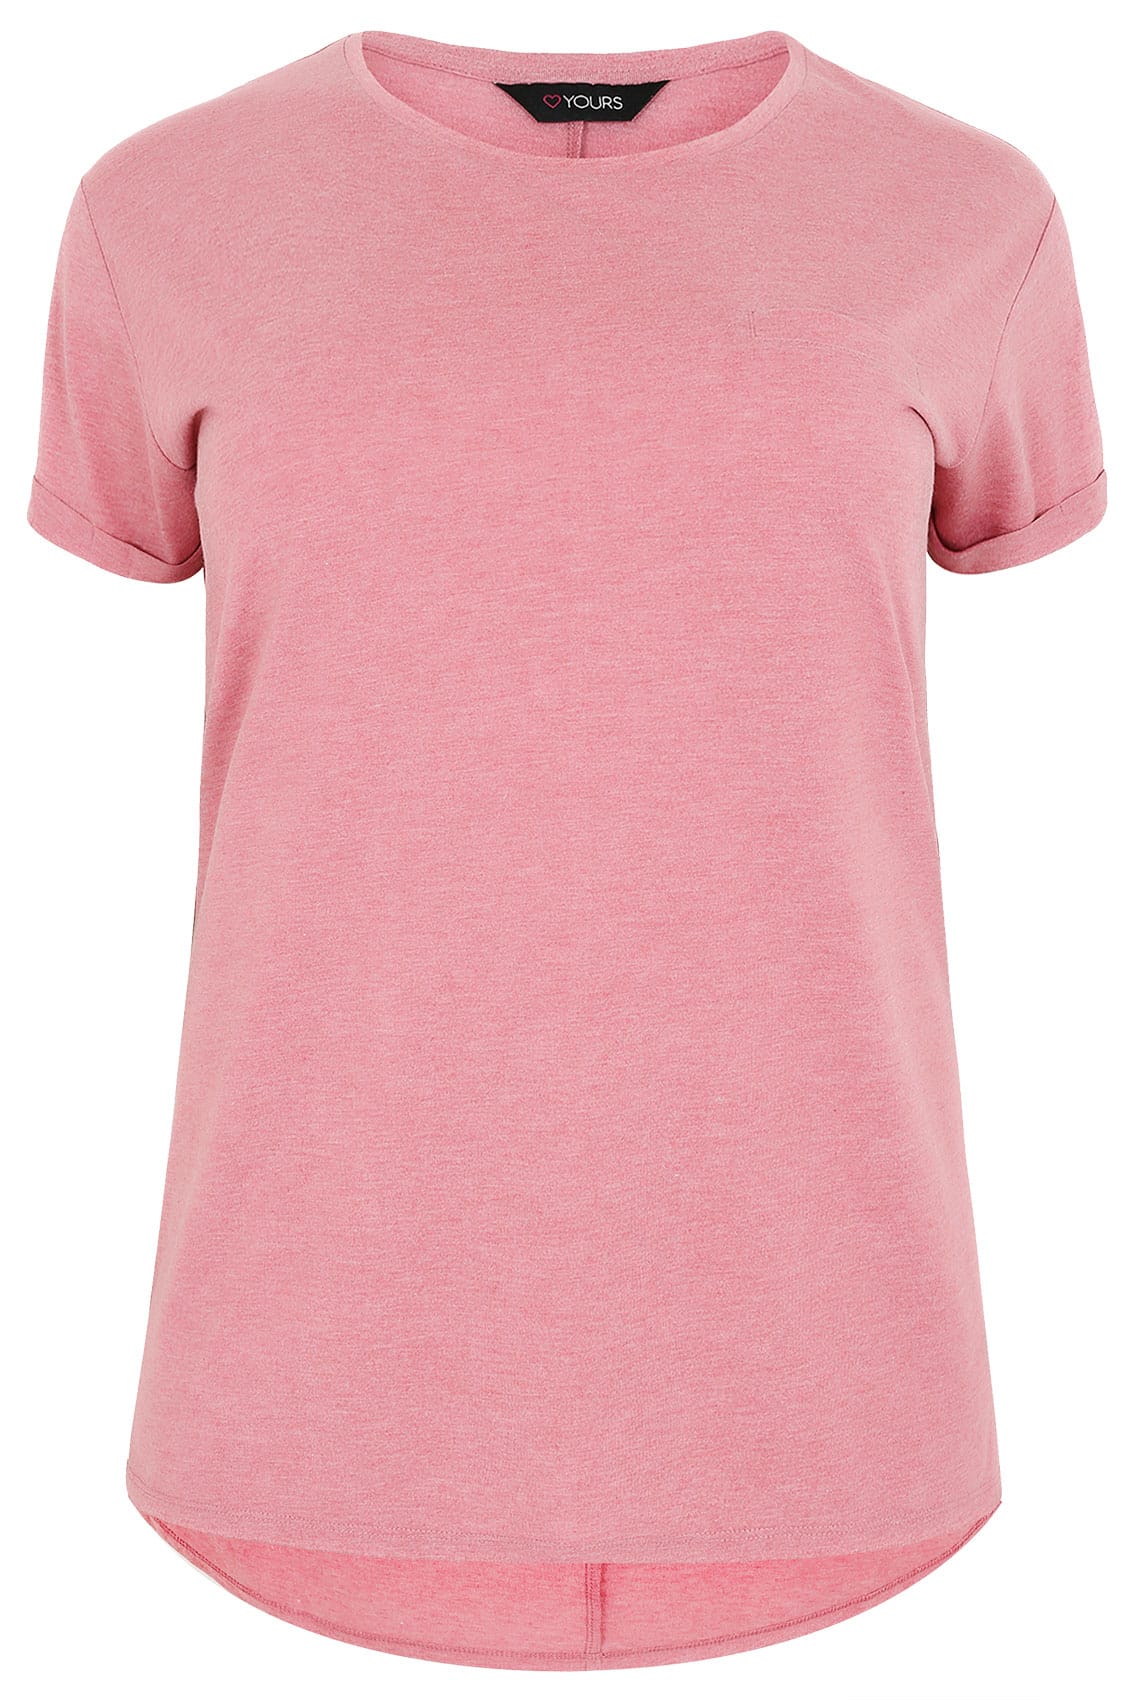 Light Pink Pocket T-Shirt With Curved Hem, Plus size 16 to 36